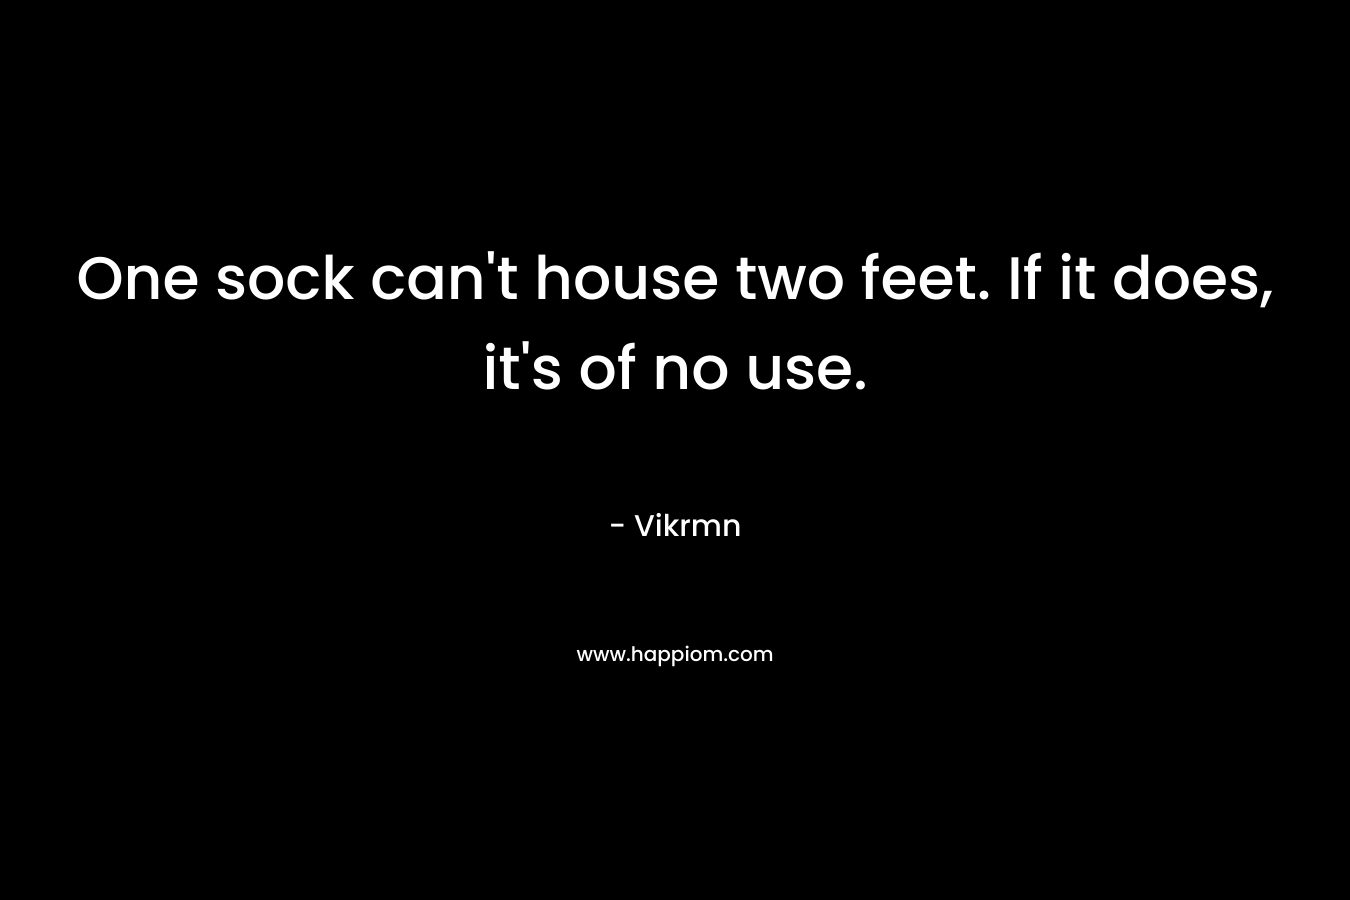 One sock can't house two feet. If it does, it's of no use.